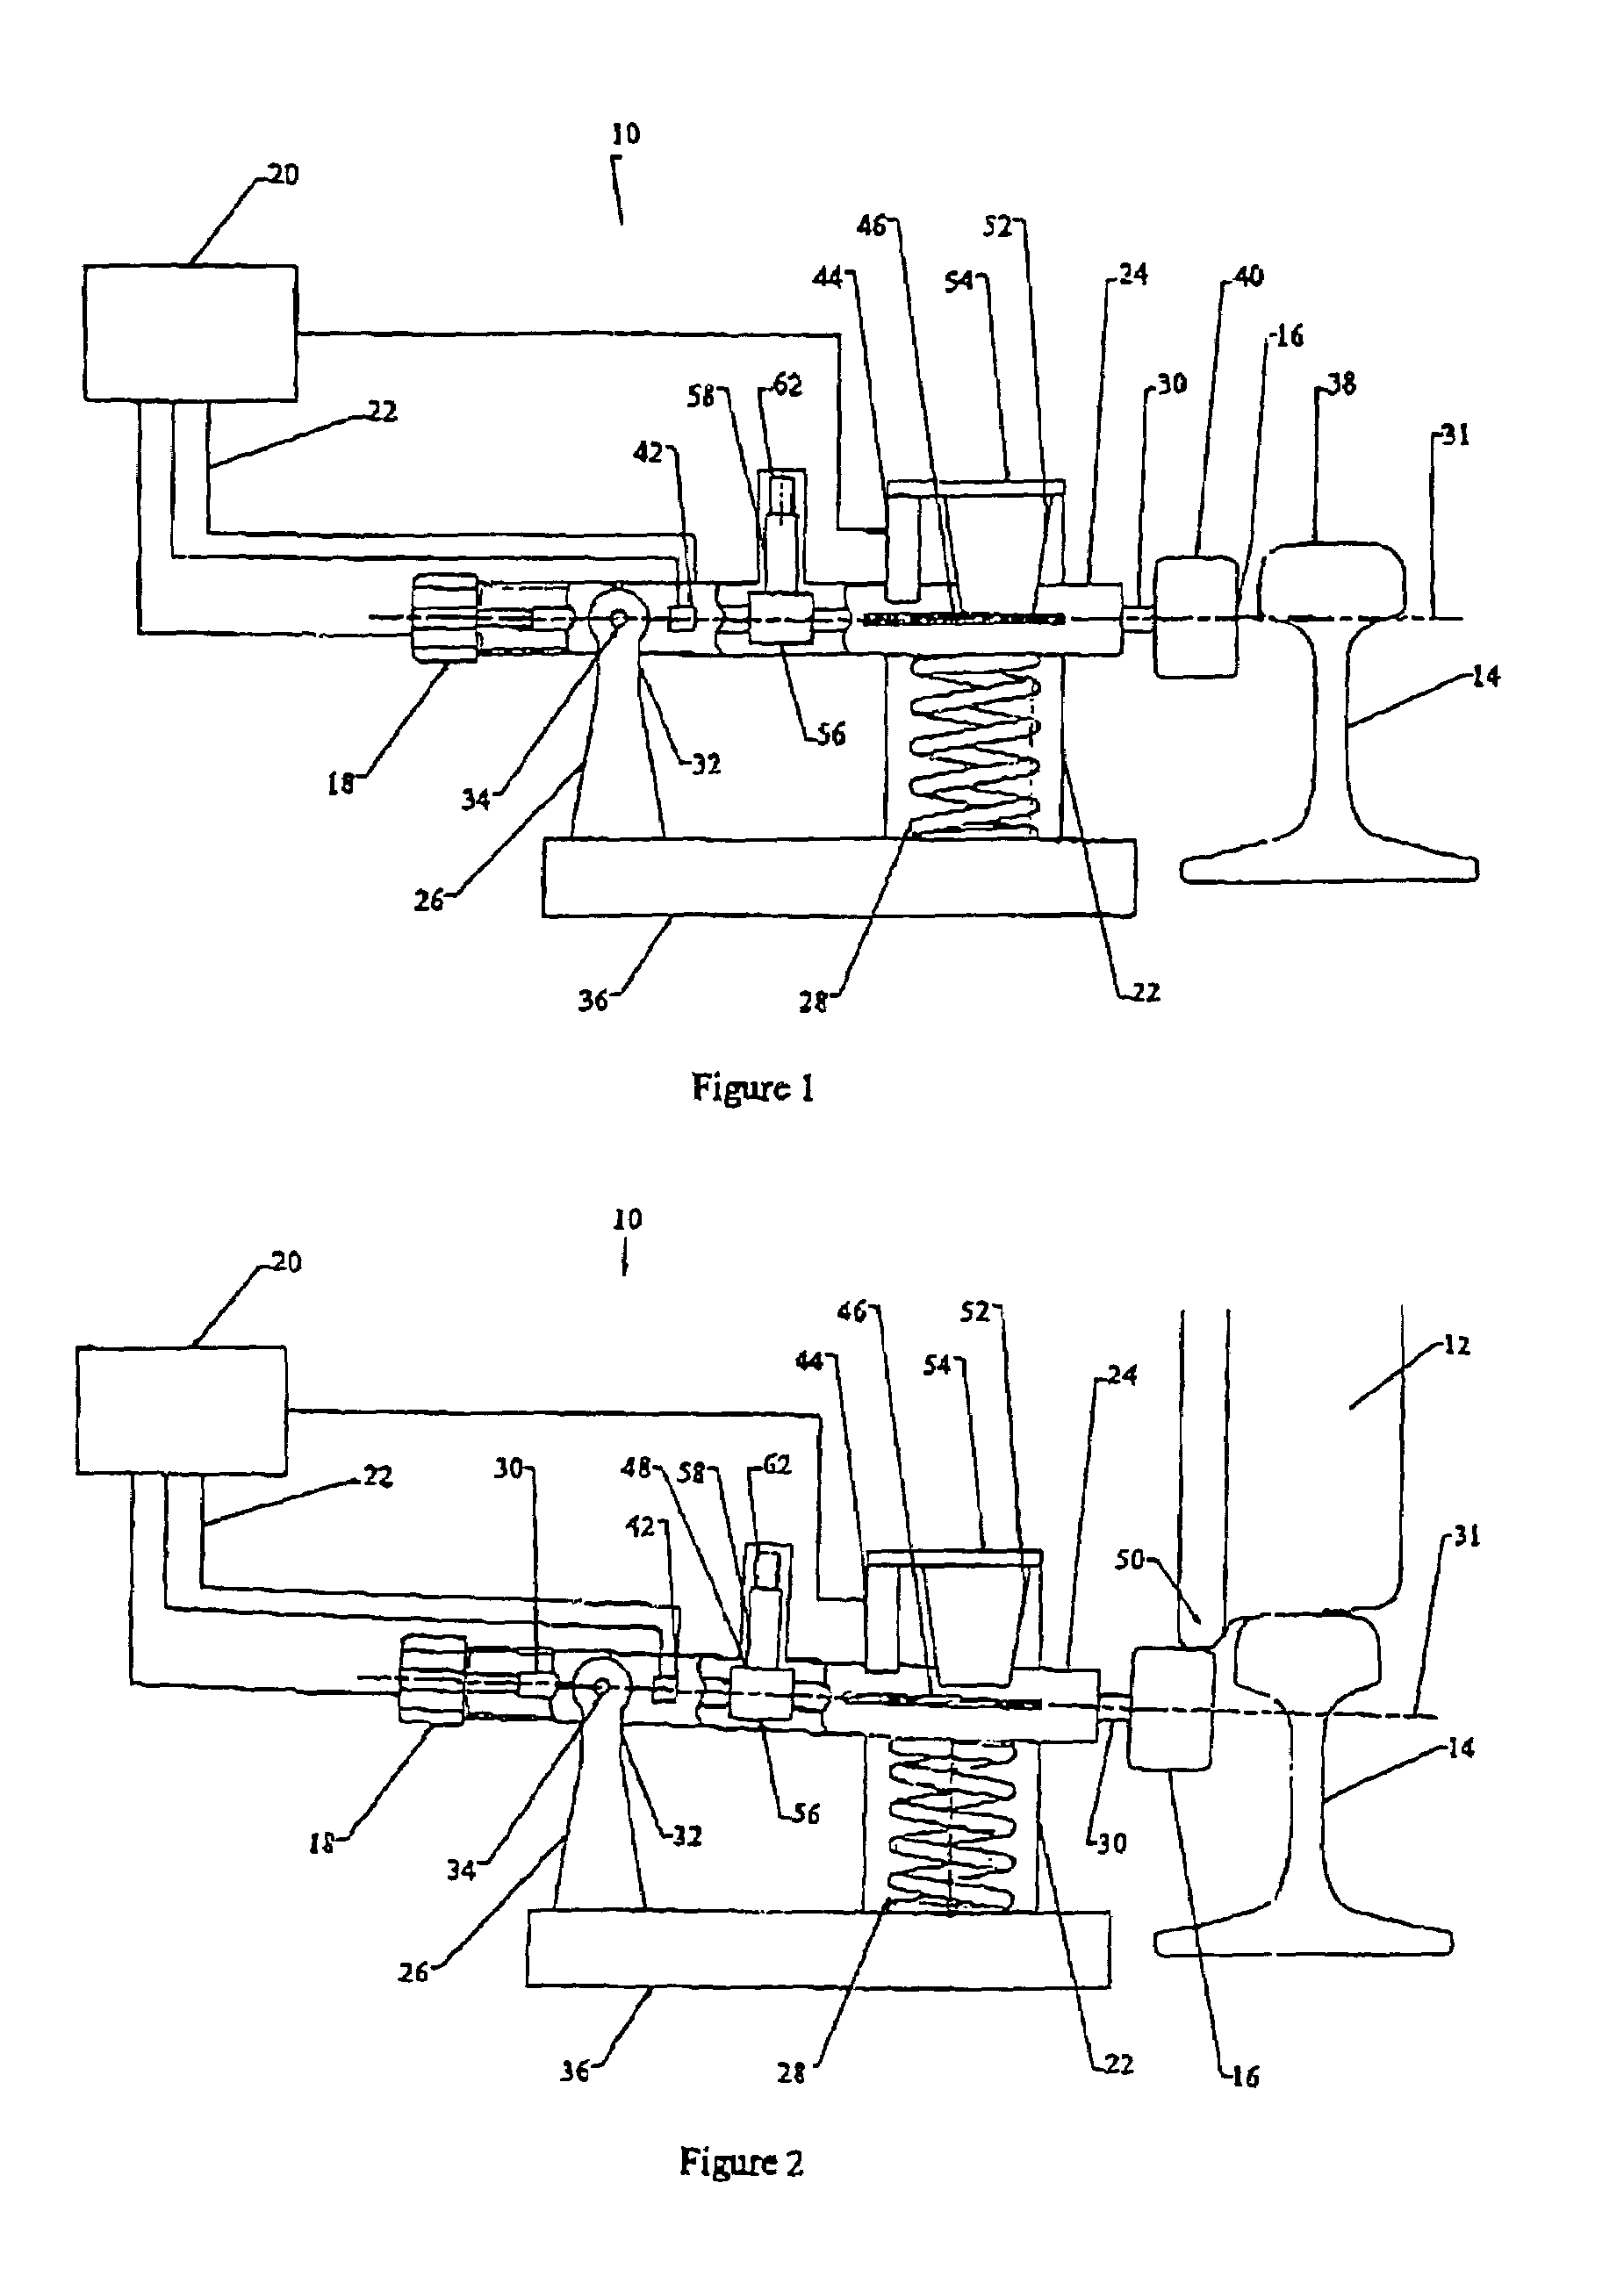 System for detecting sliding of a wheel travelling along a track